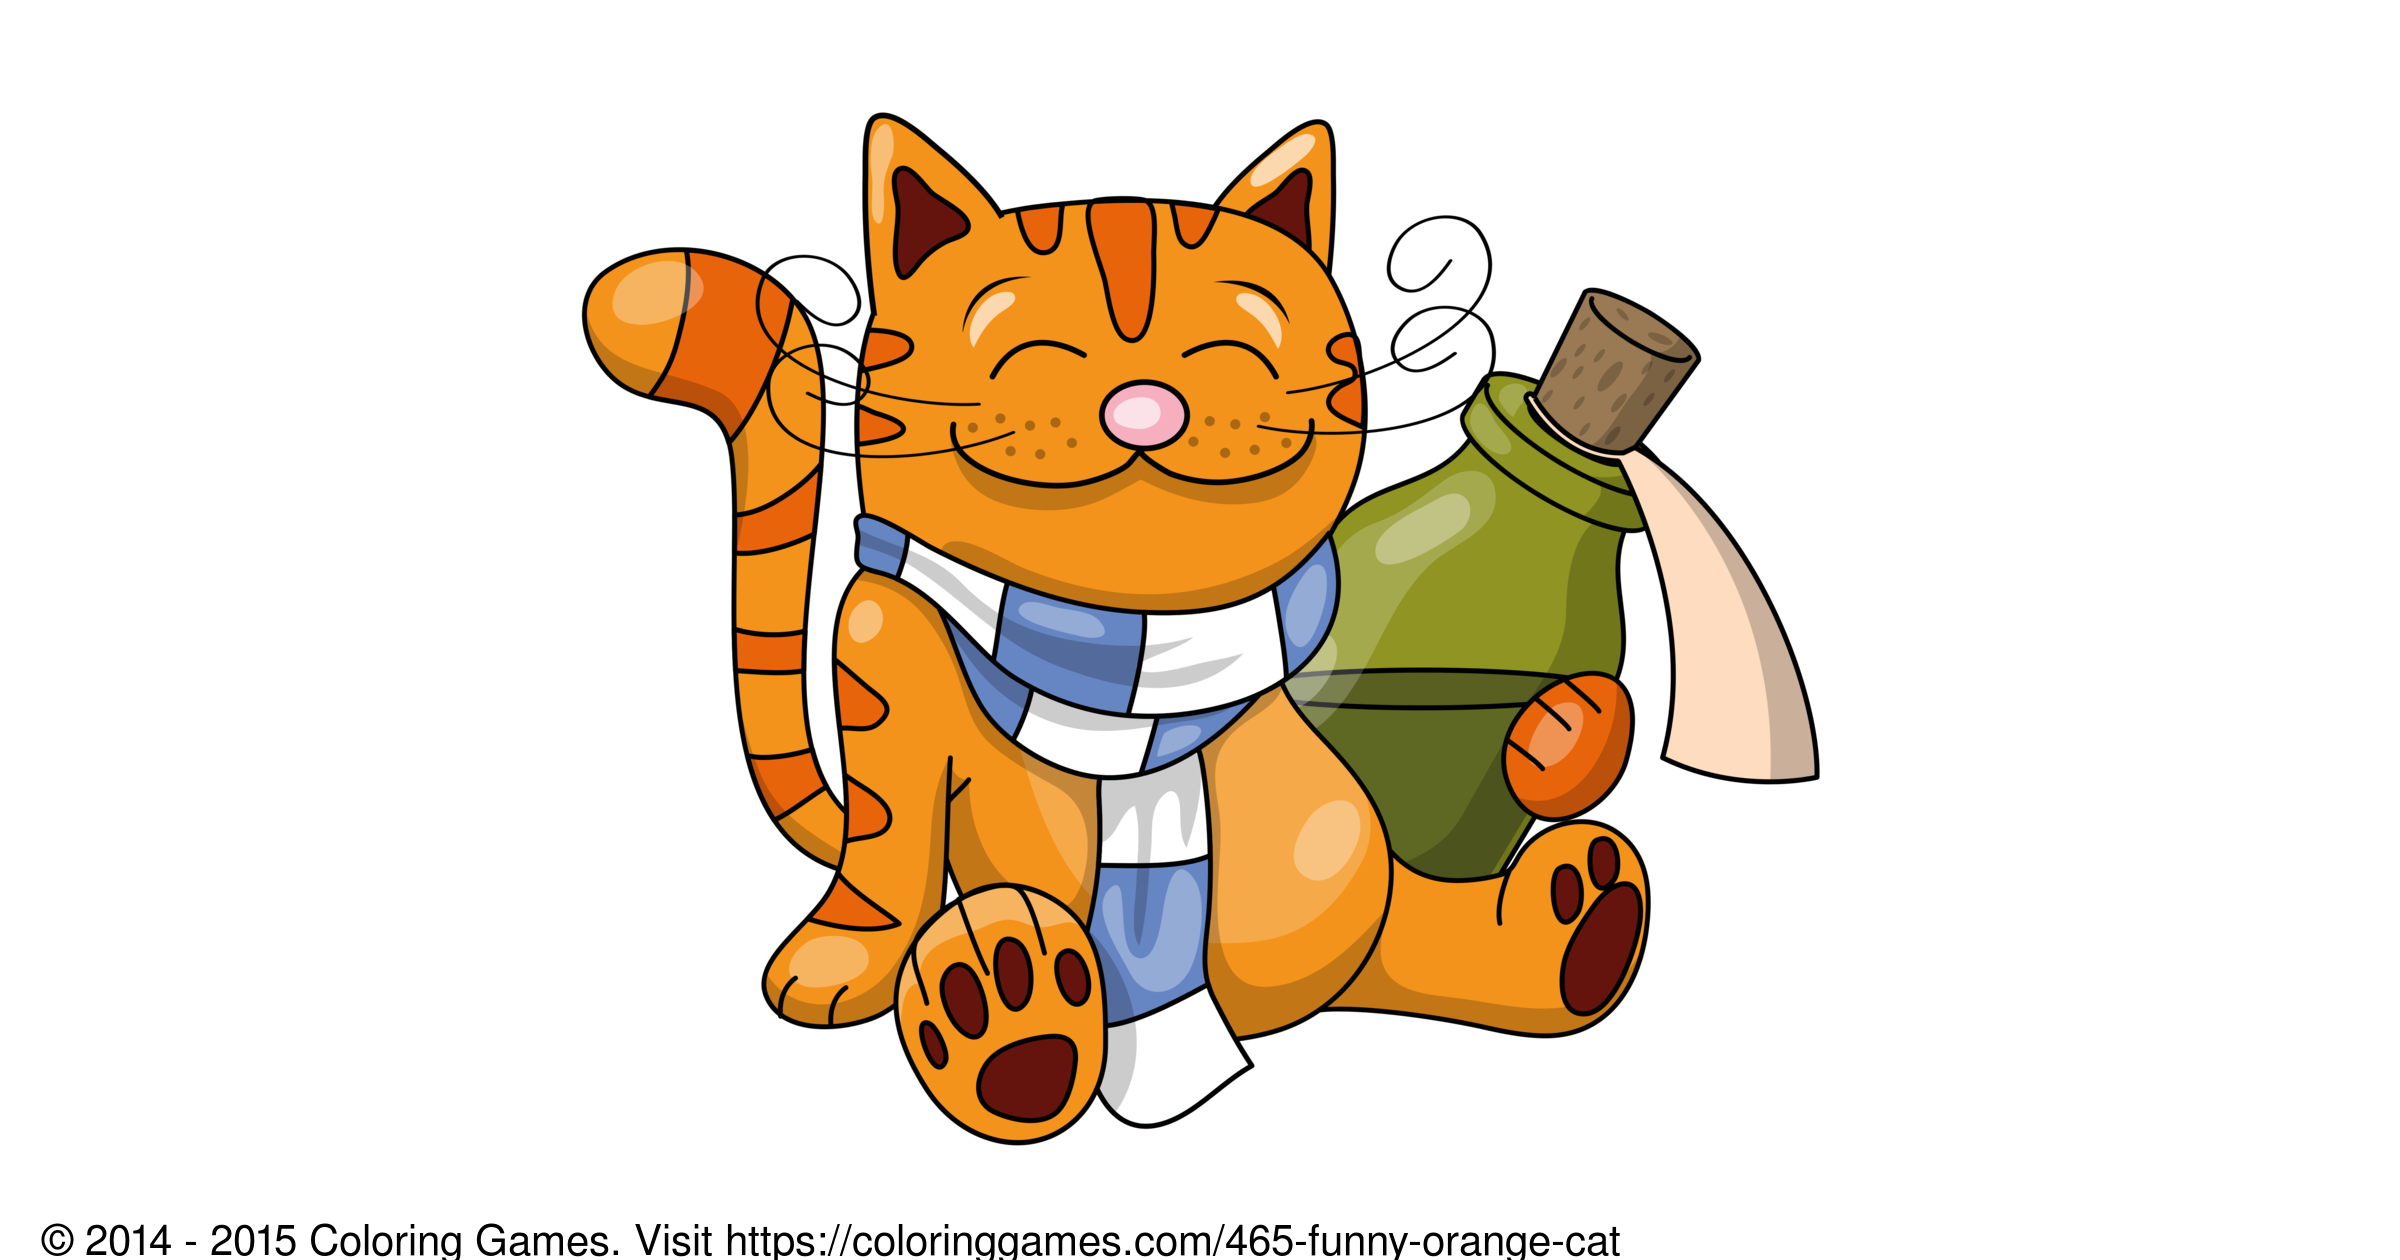 Funny orange cat - Coloring Games and Coloring Pages